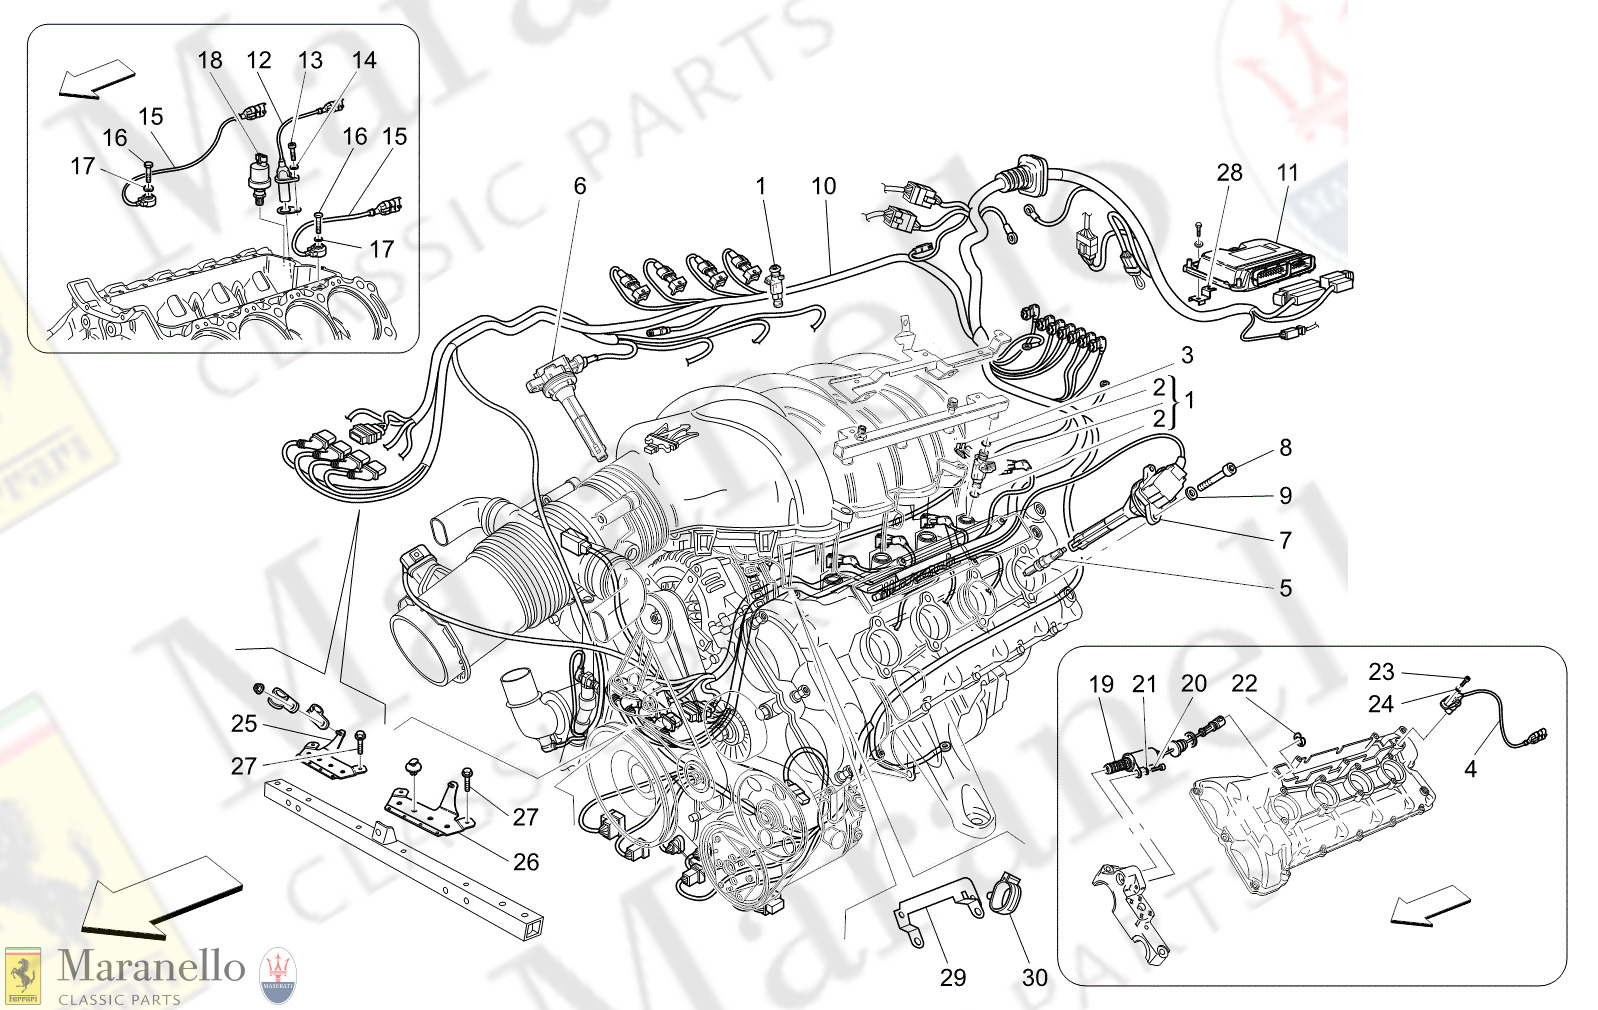 01.90 - 11 - 0190 - 11 Electronic Control: Injection And Engine Timing Control